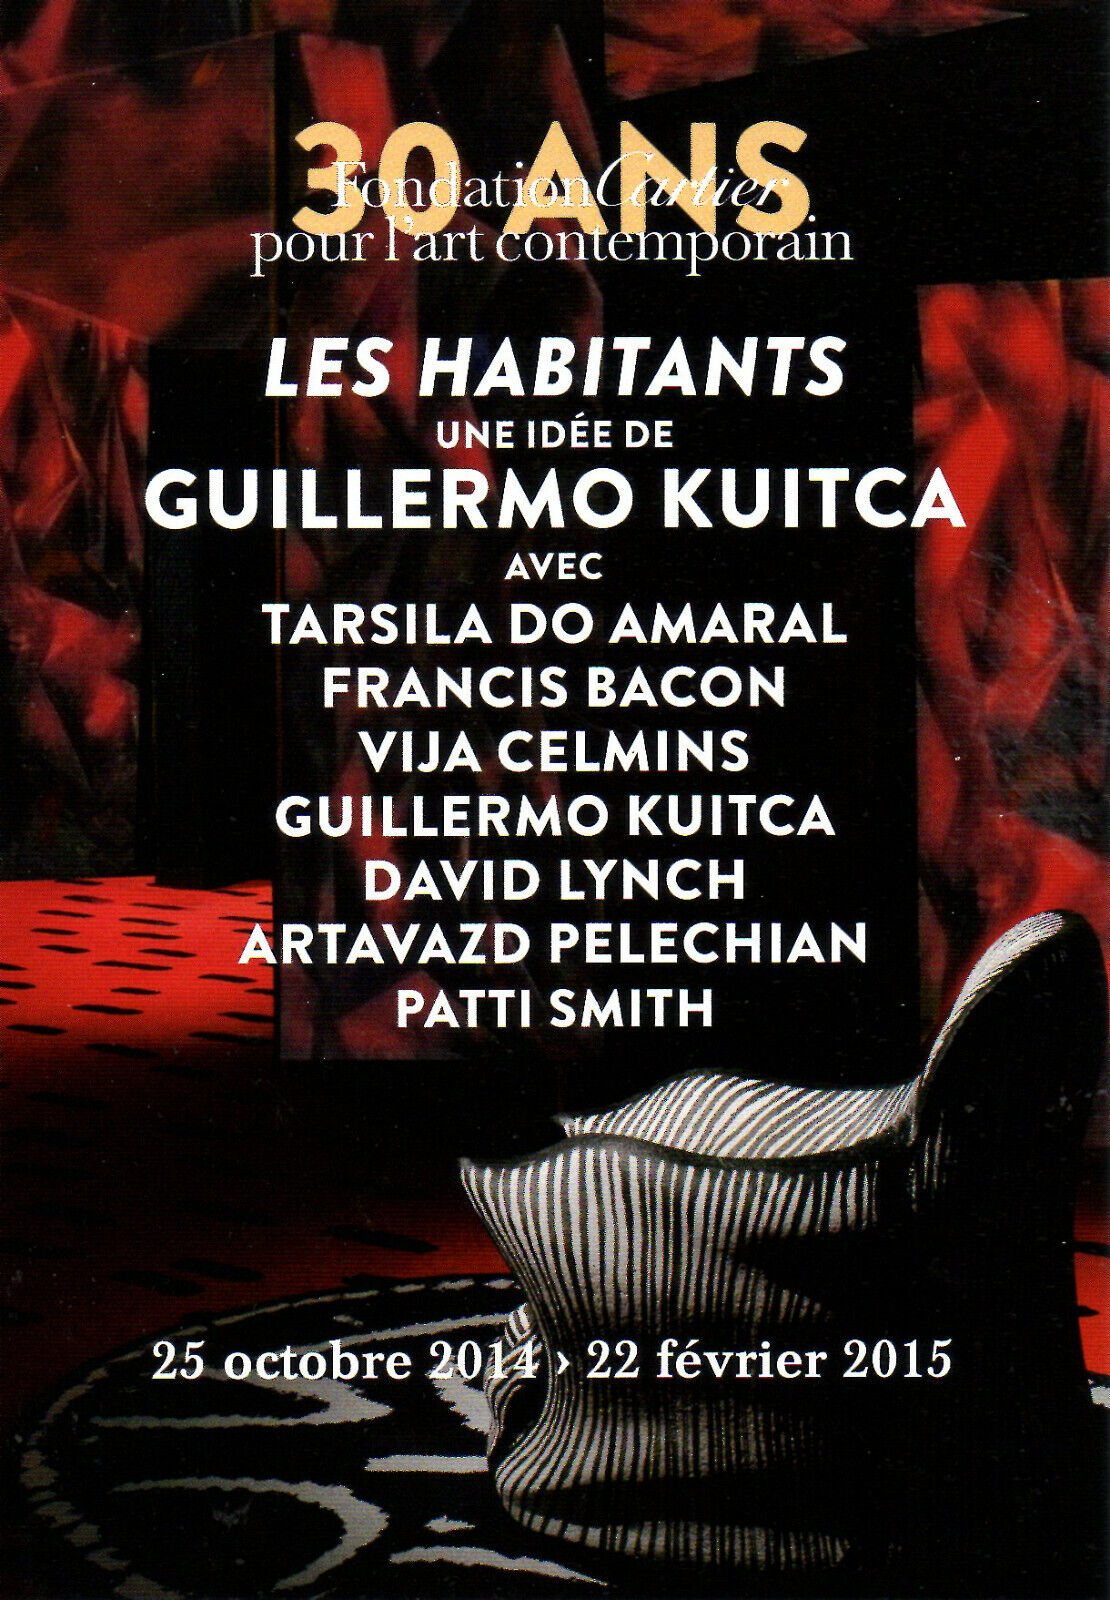 advertising card LES INHABITANTS - GUILLERMO KUITCA, 30 years old Fondation Cartier 